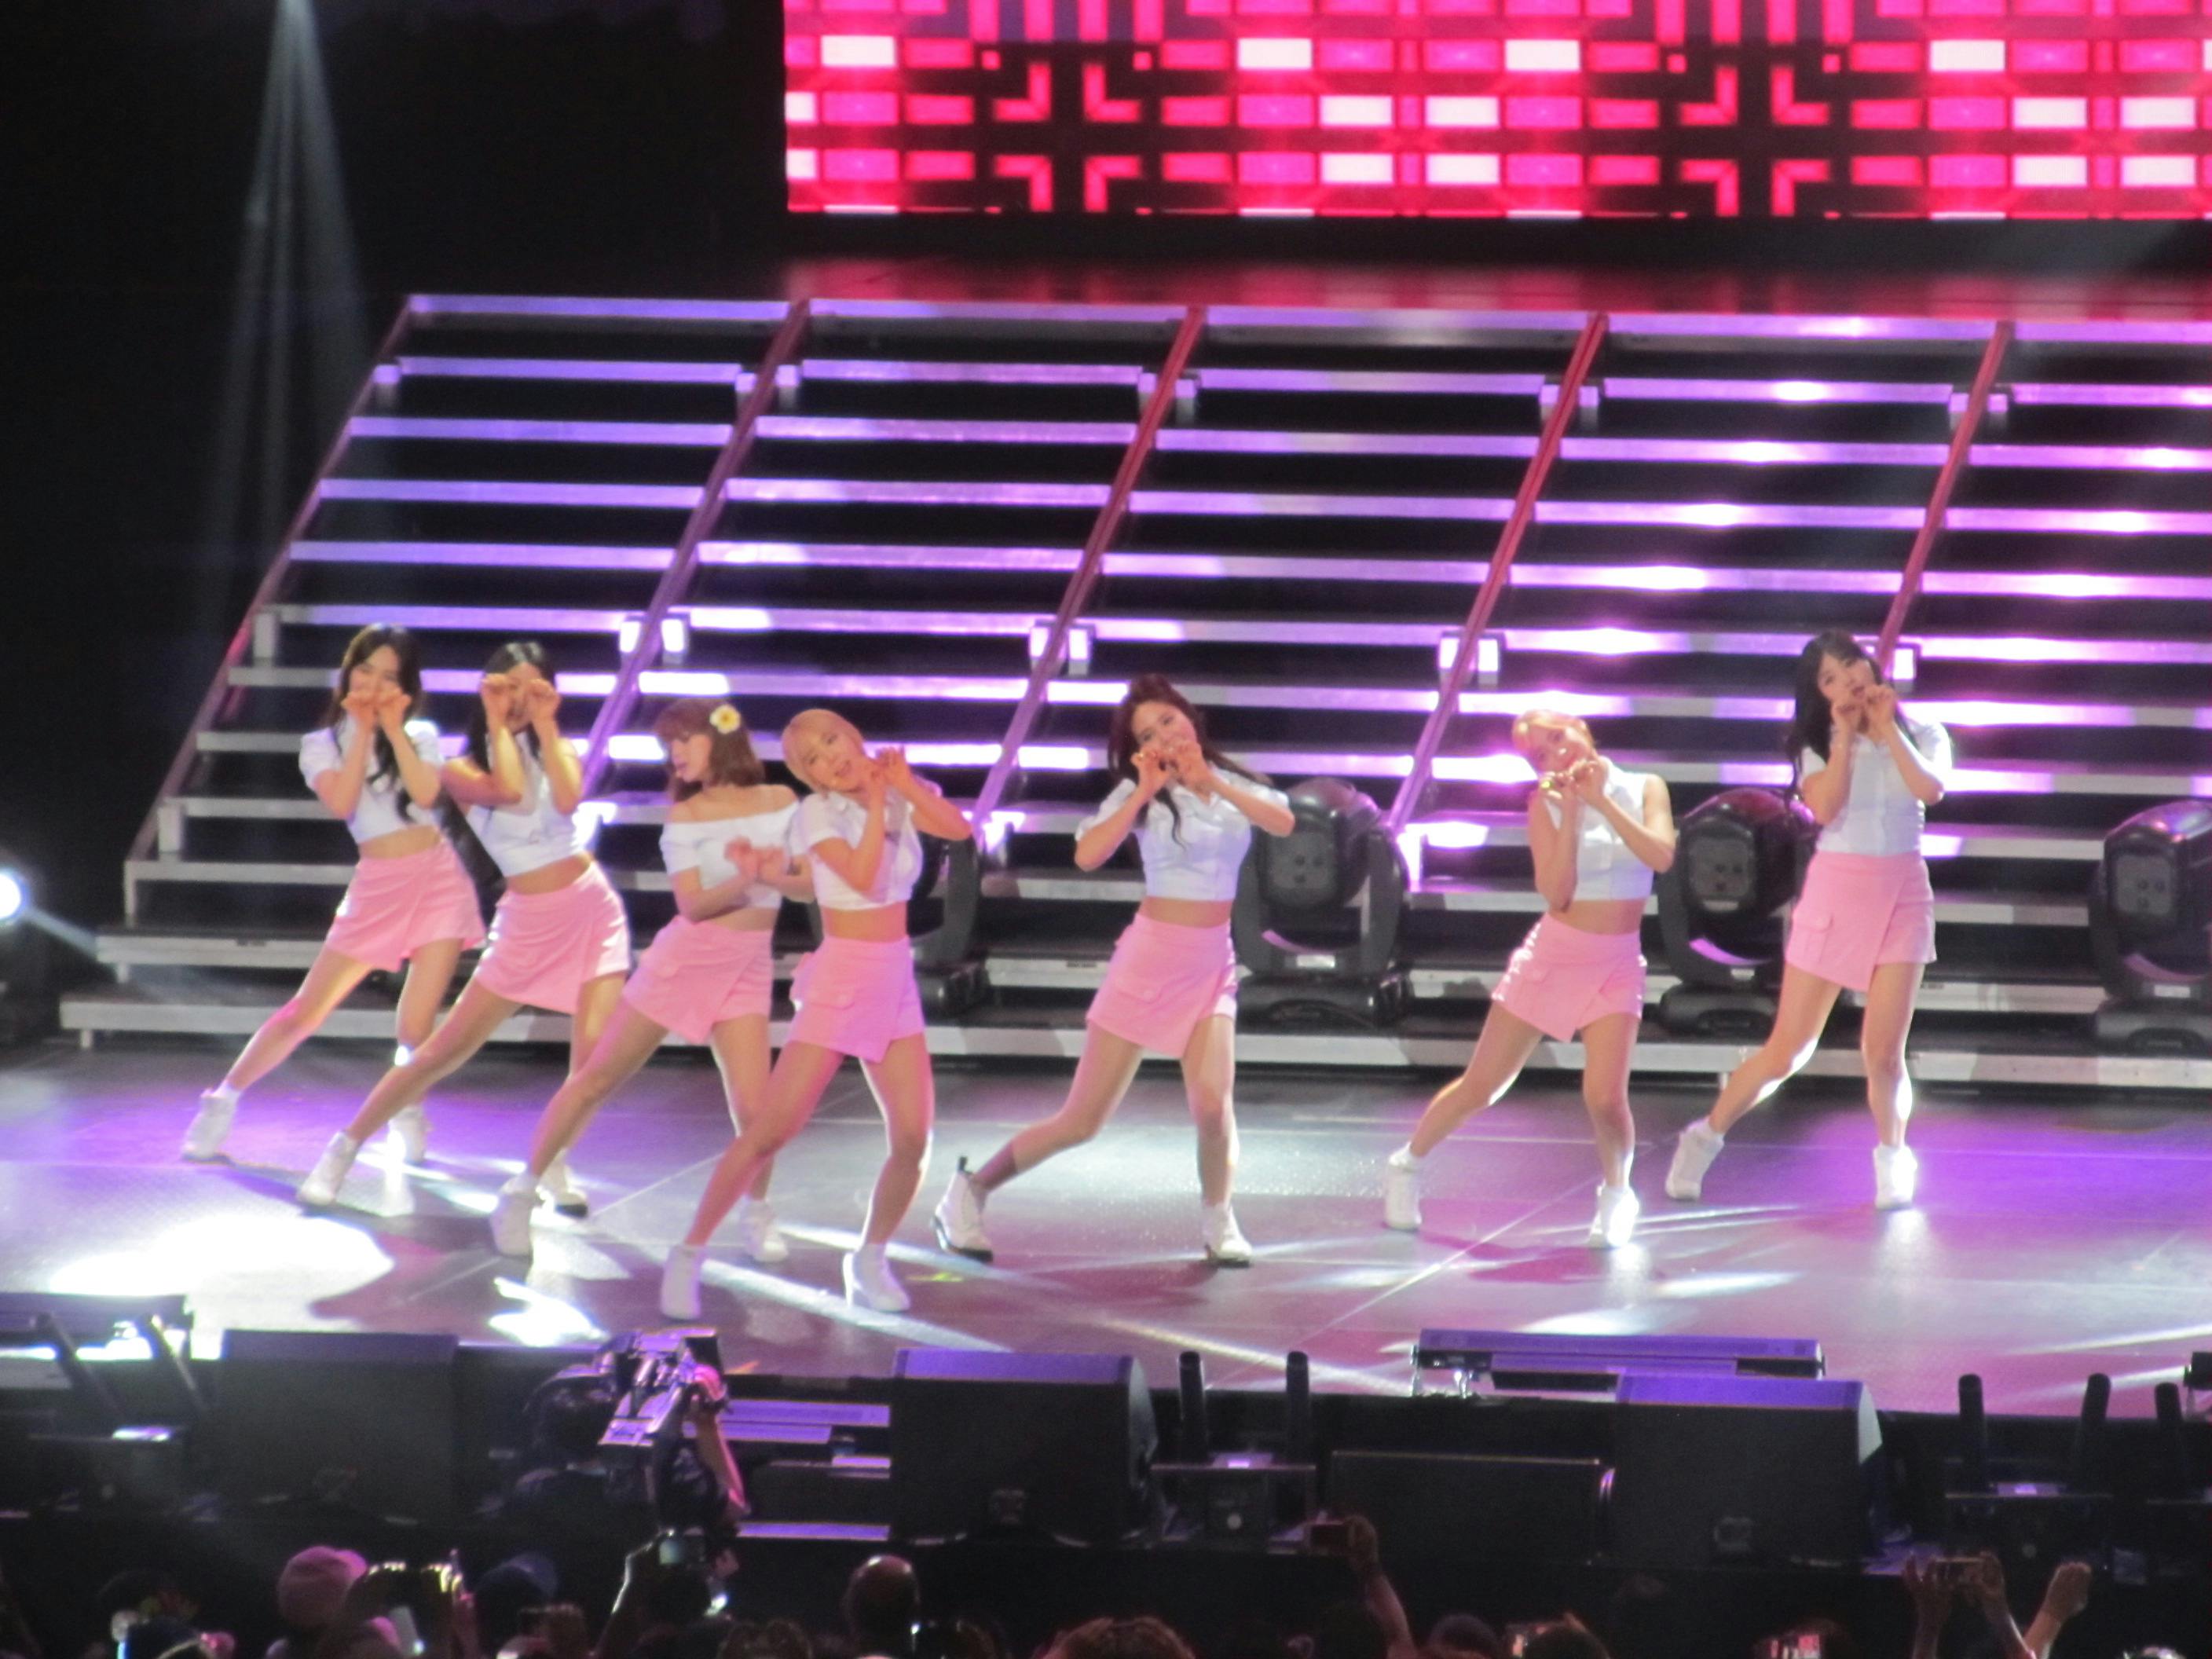 AoA in performance